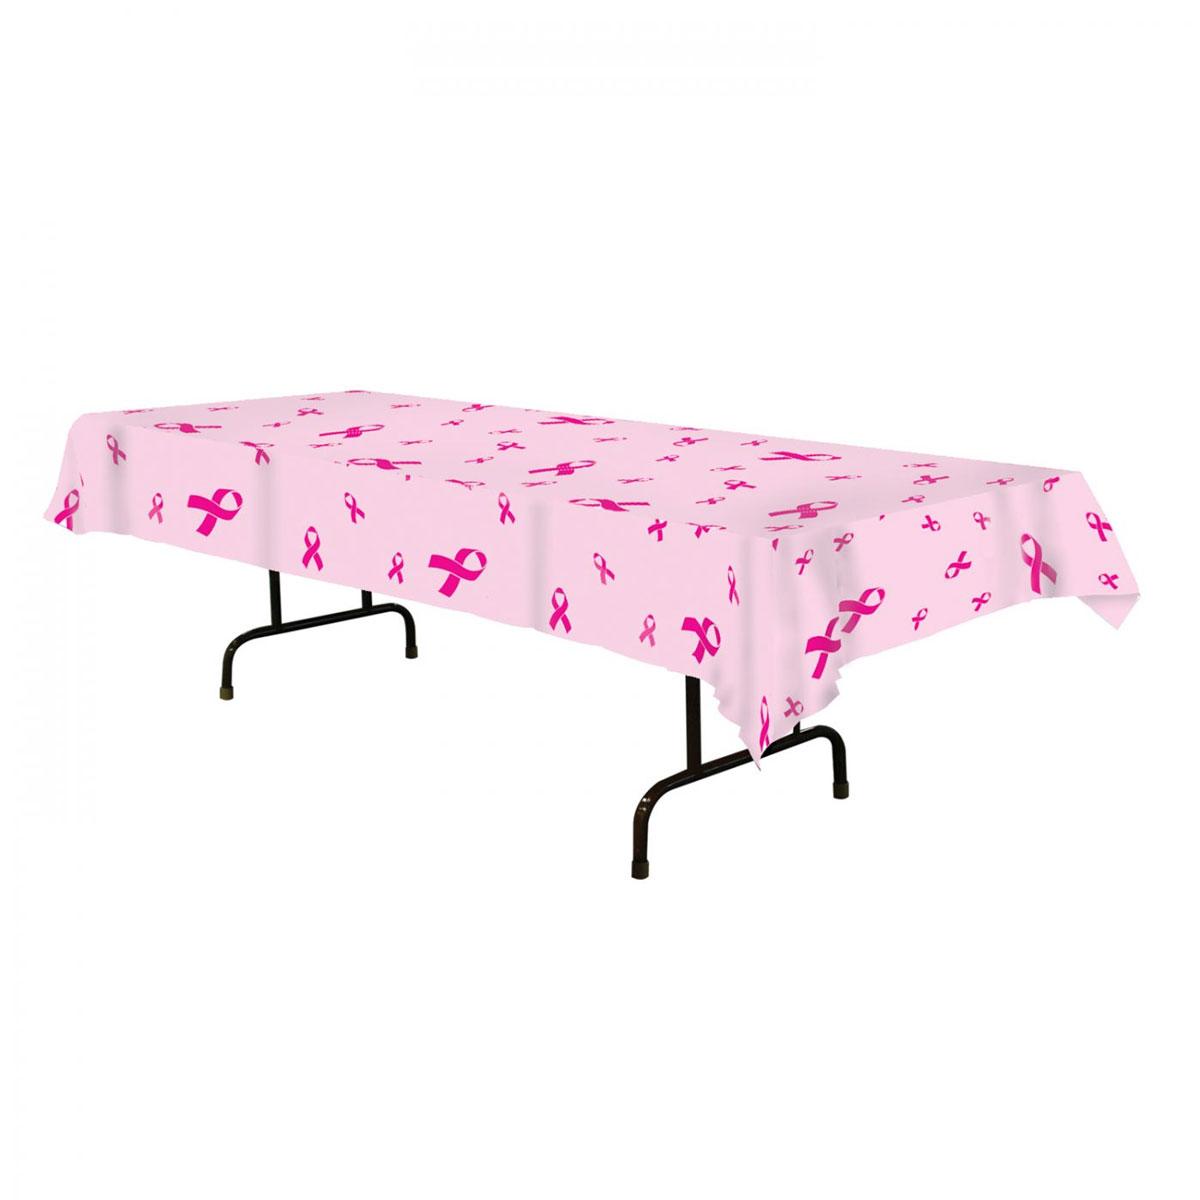 Pink Ribbon Table Cover 108" x 52" in durable plastic by Beistle 57939 available here at Karnival Costumes online party shop